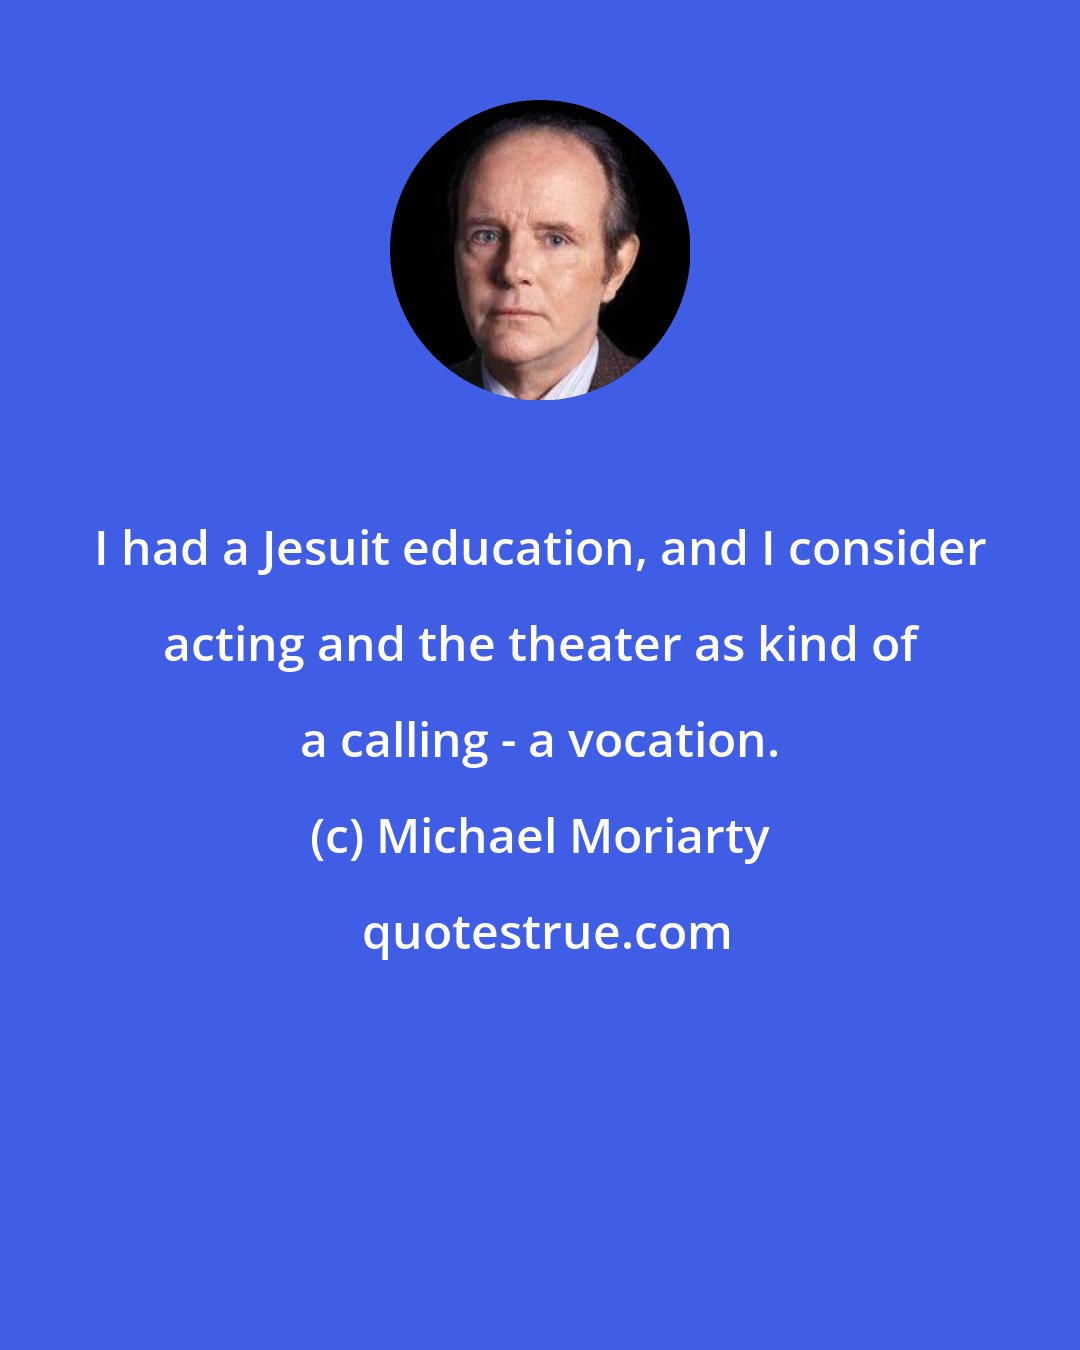 Michael Moriarty: I had a Jesuit education, and I consider acting and the theater as kind of a calling - a vocation.